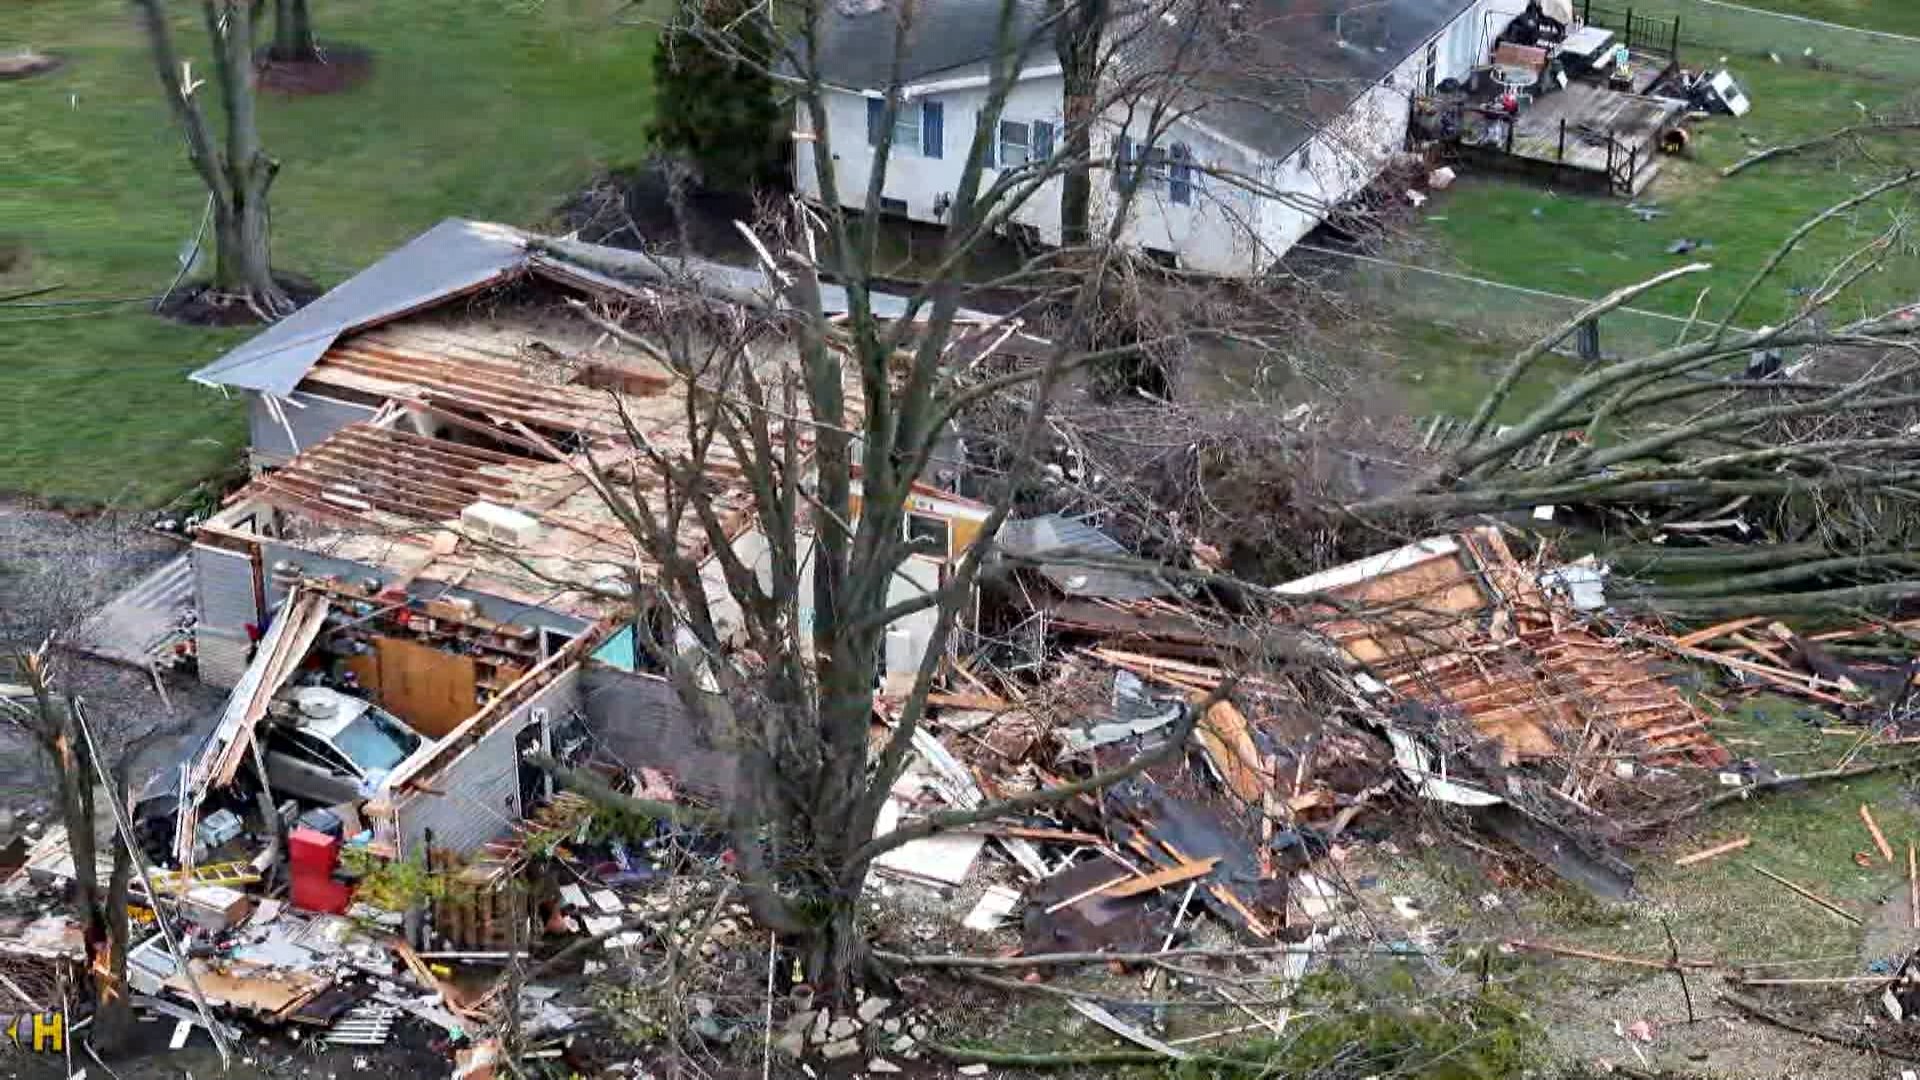 6 tornadoes touched down in central Ohio, NWS confirms